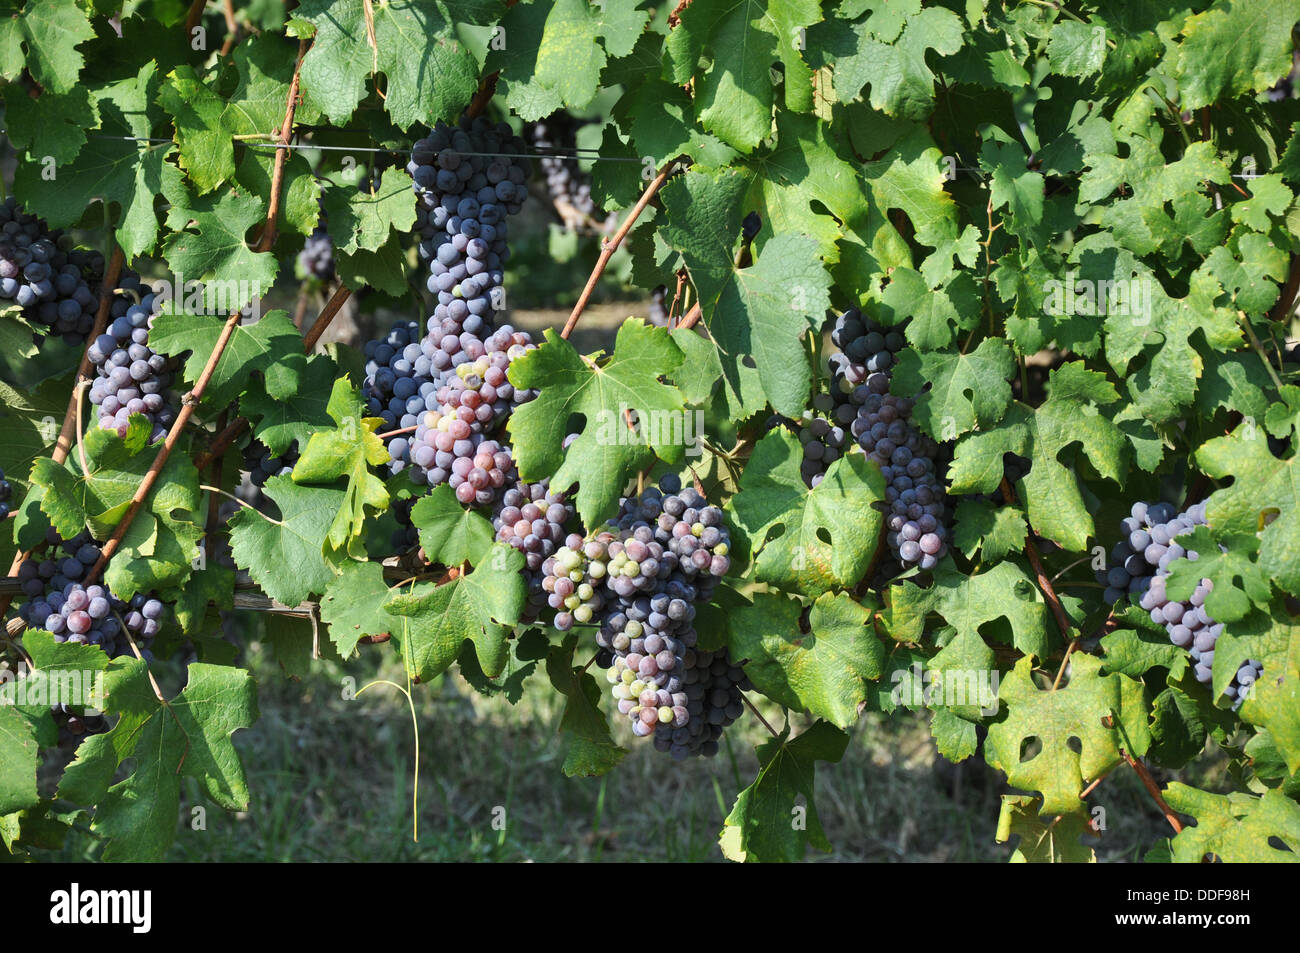 Ripe grapes on vines ready for harvest in the Piedmont (Piedmonte) region in northern Italy. Stock Photo